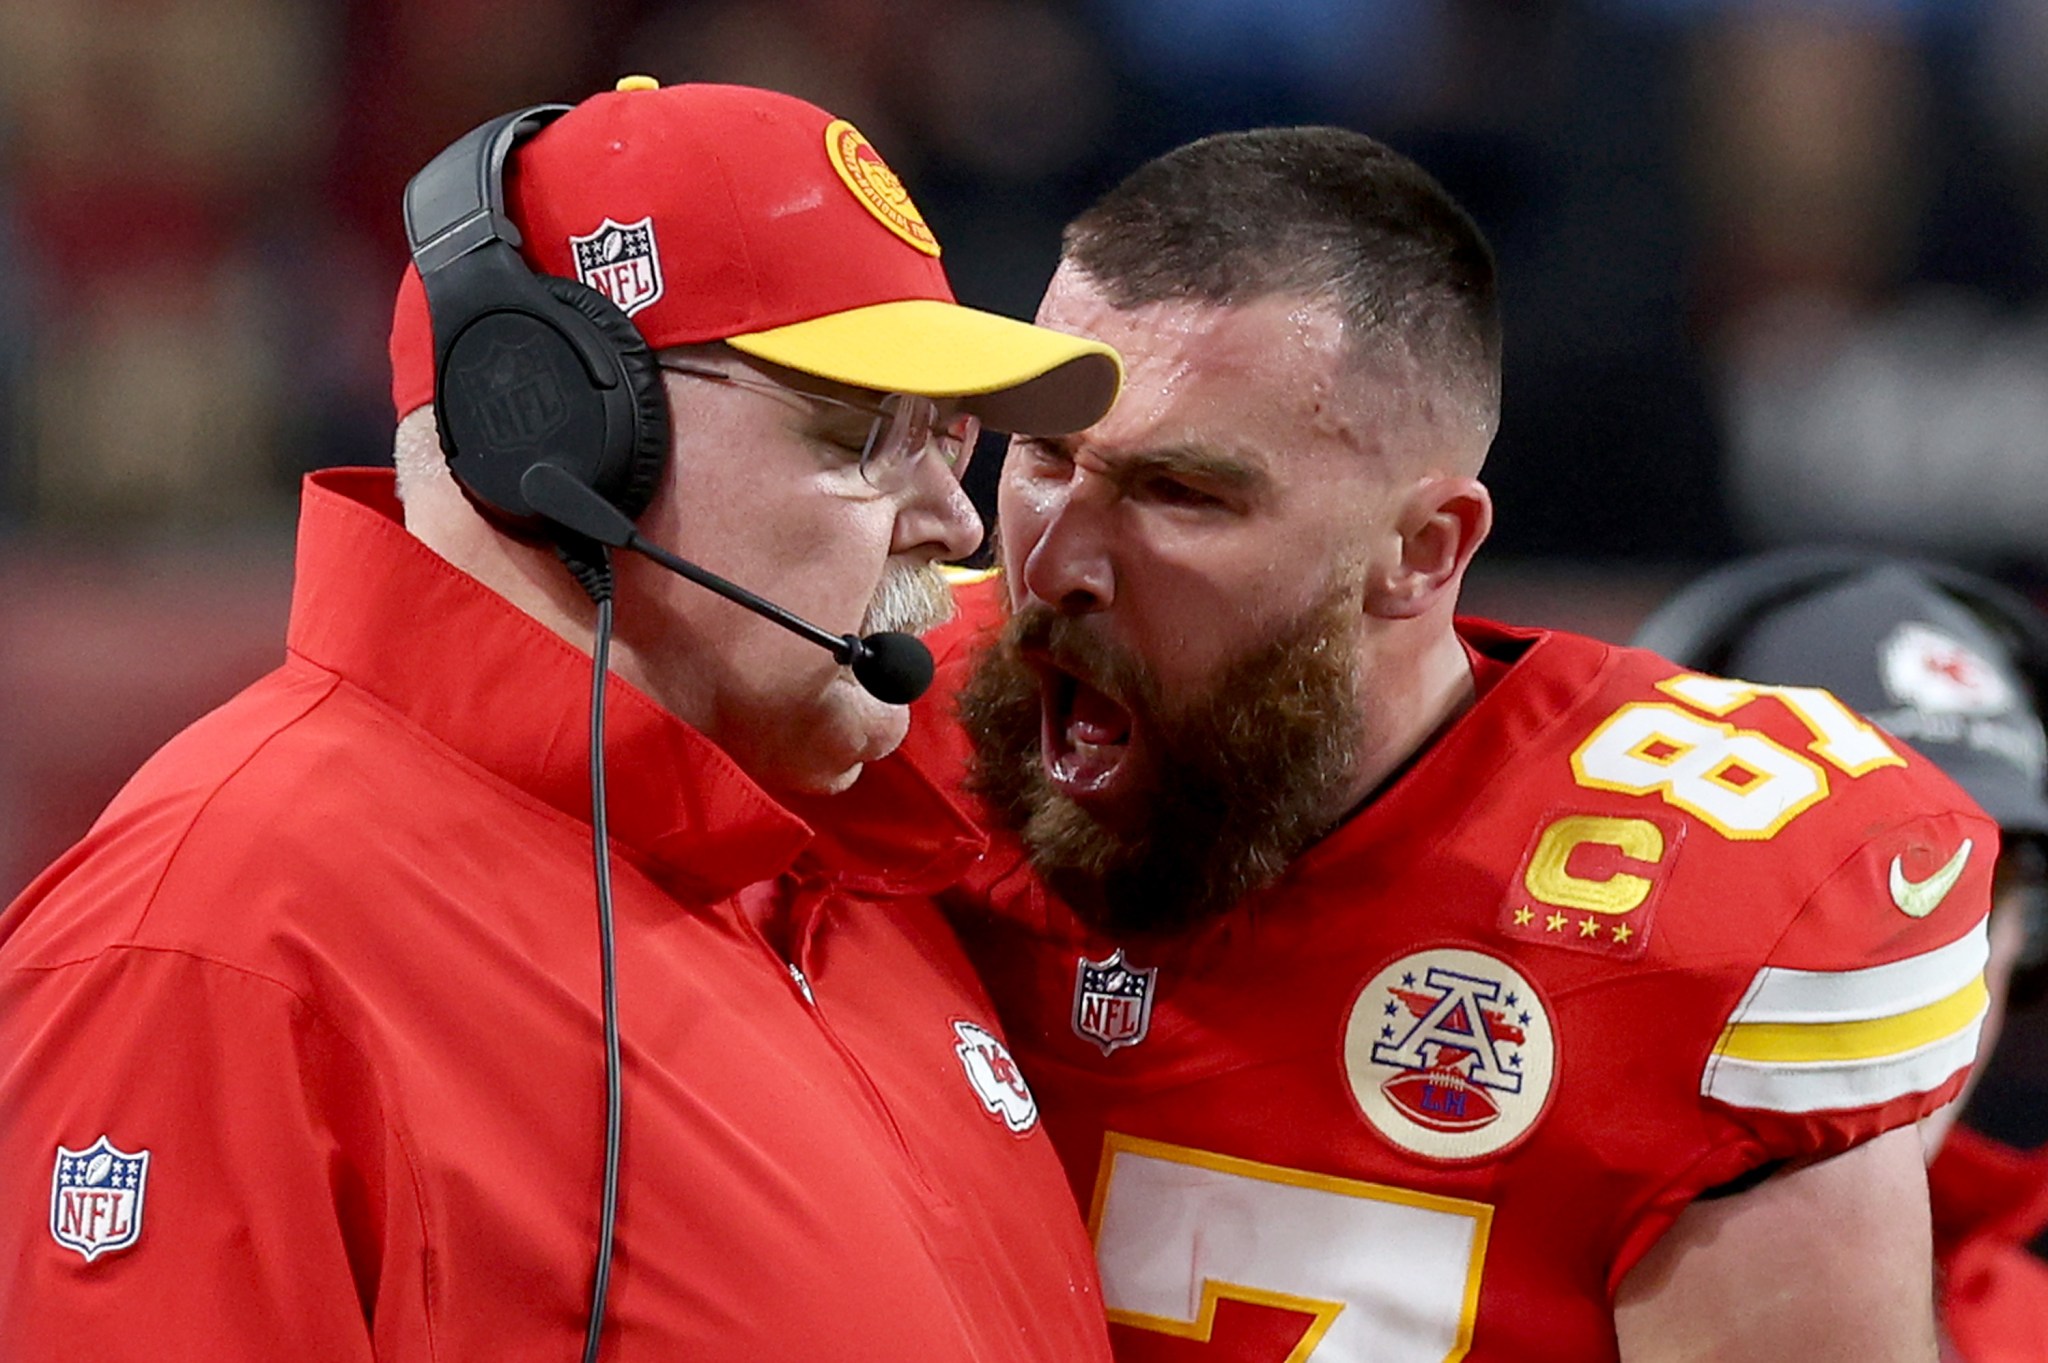 travis kelce’s super bowl behavior is emblematic of the ‘rise of the jerk’